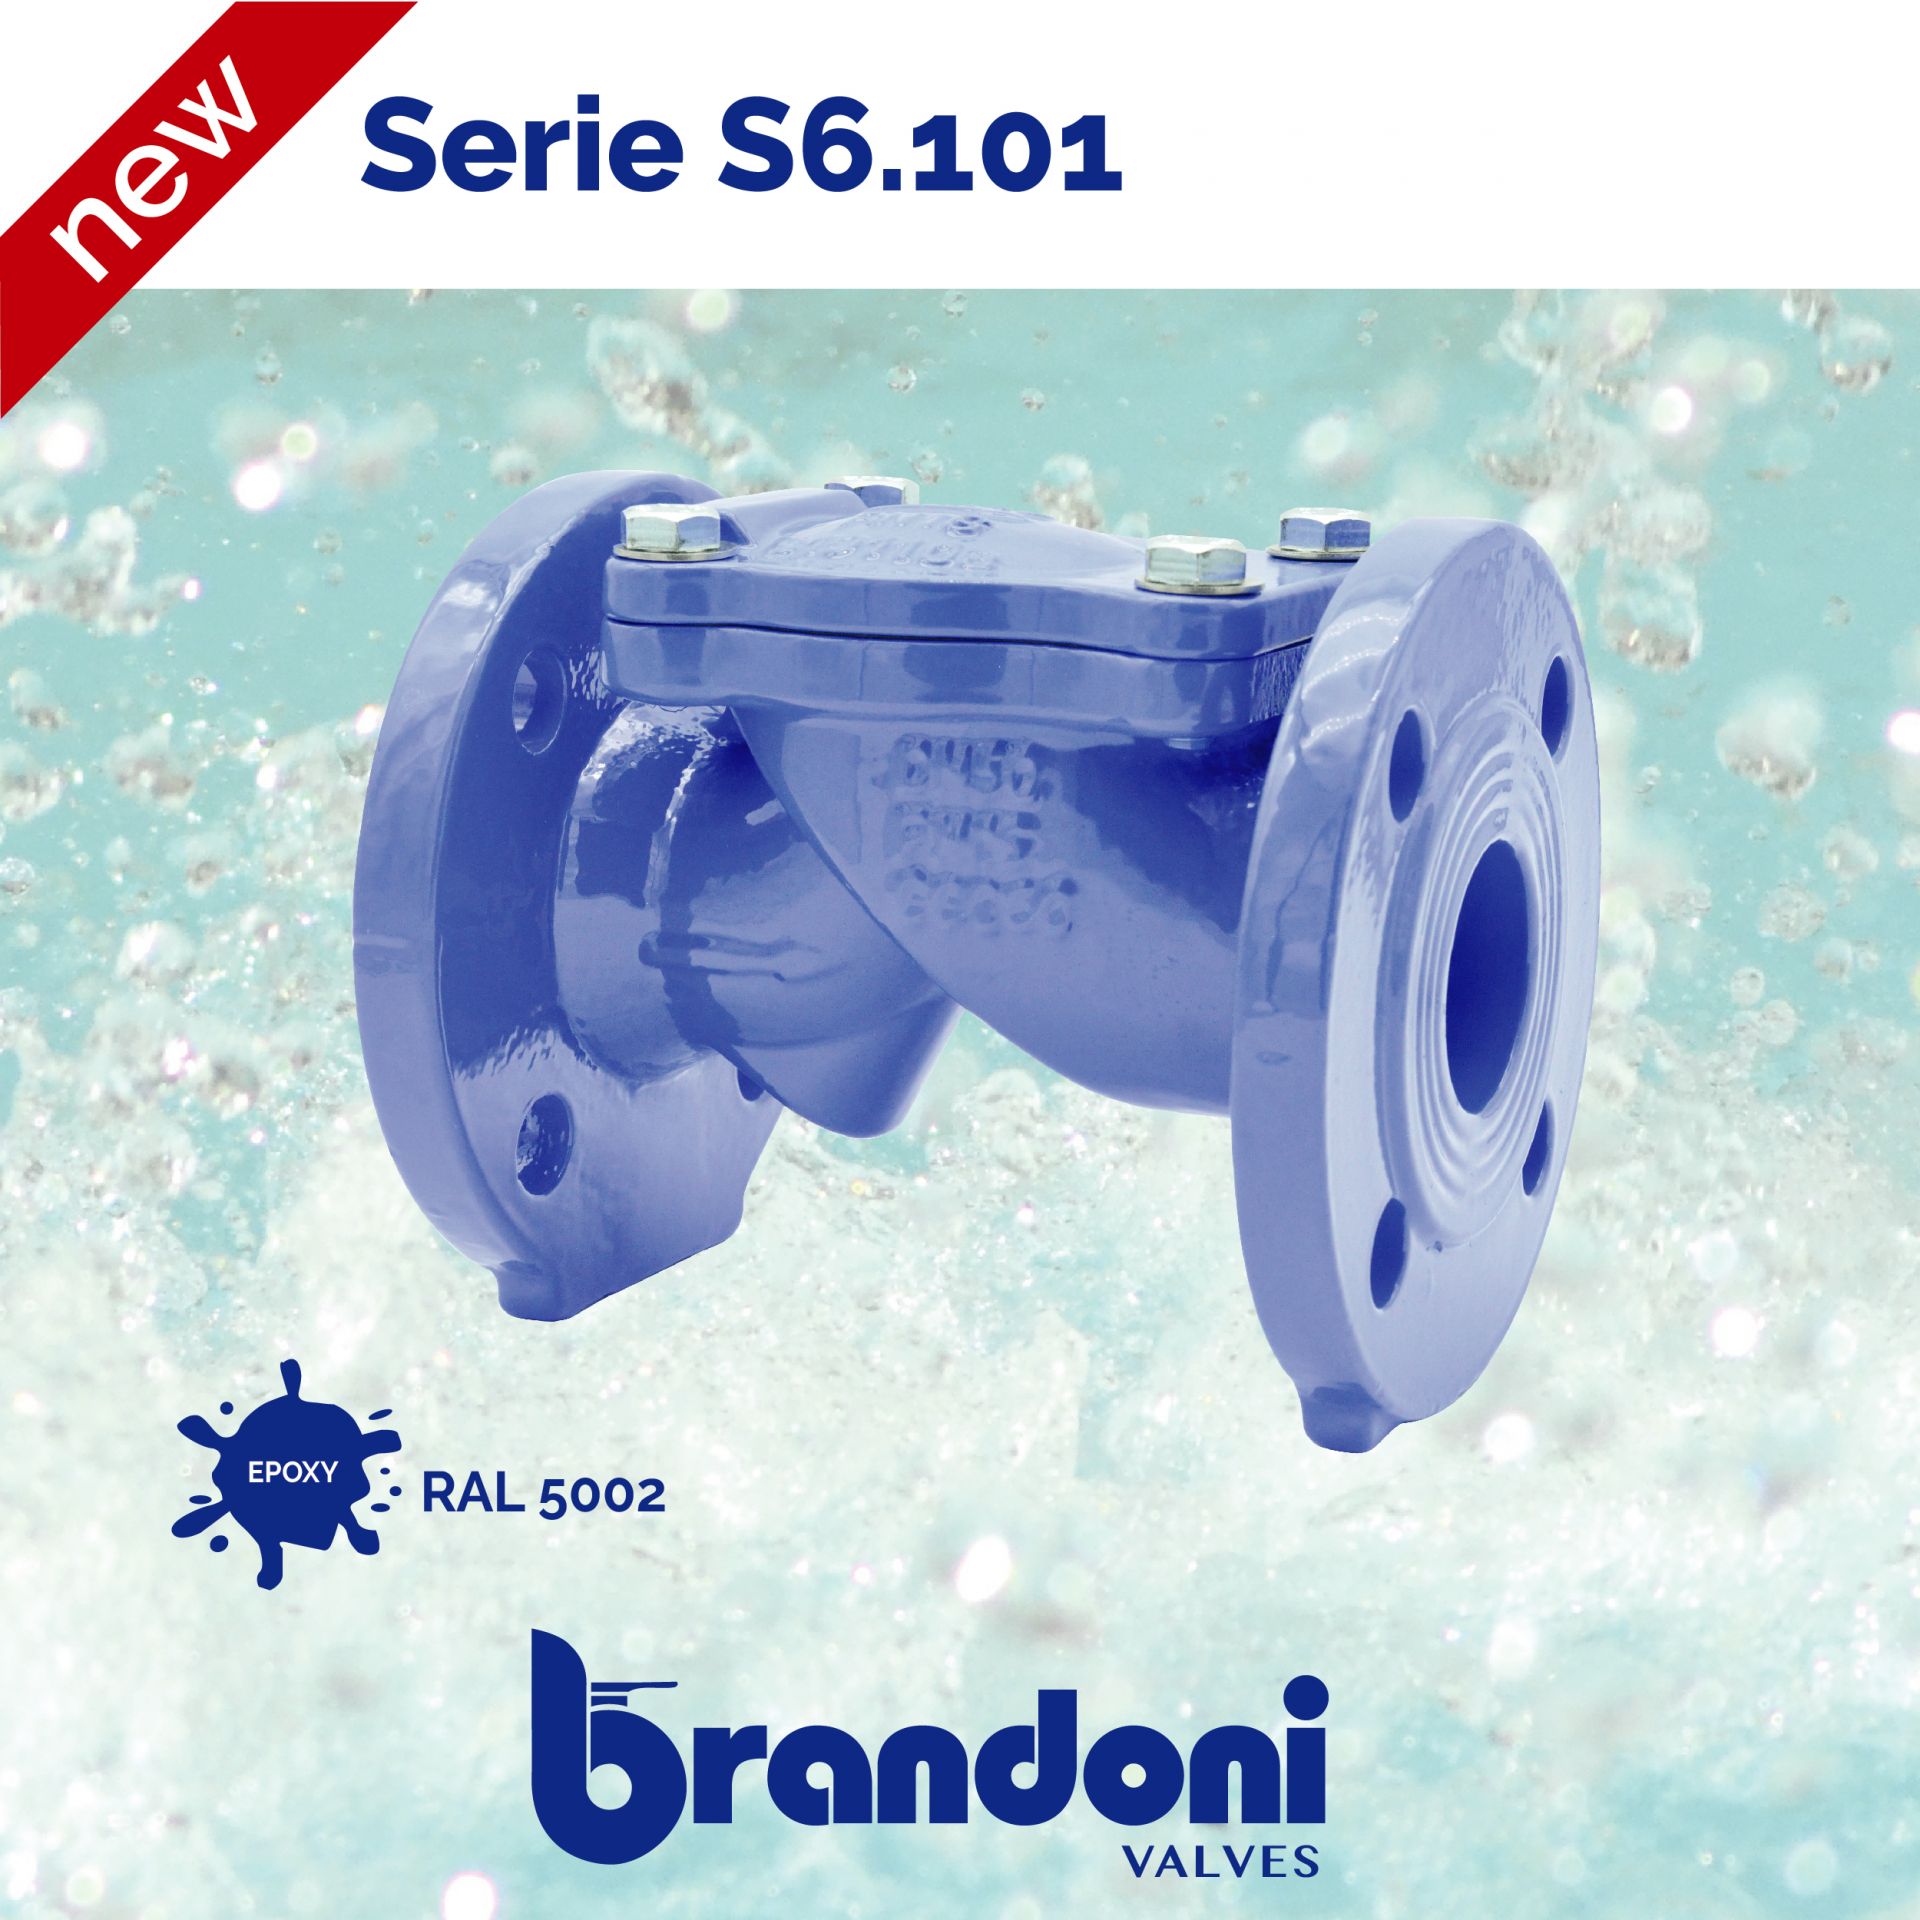 New flanged swing check valve series S6.101